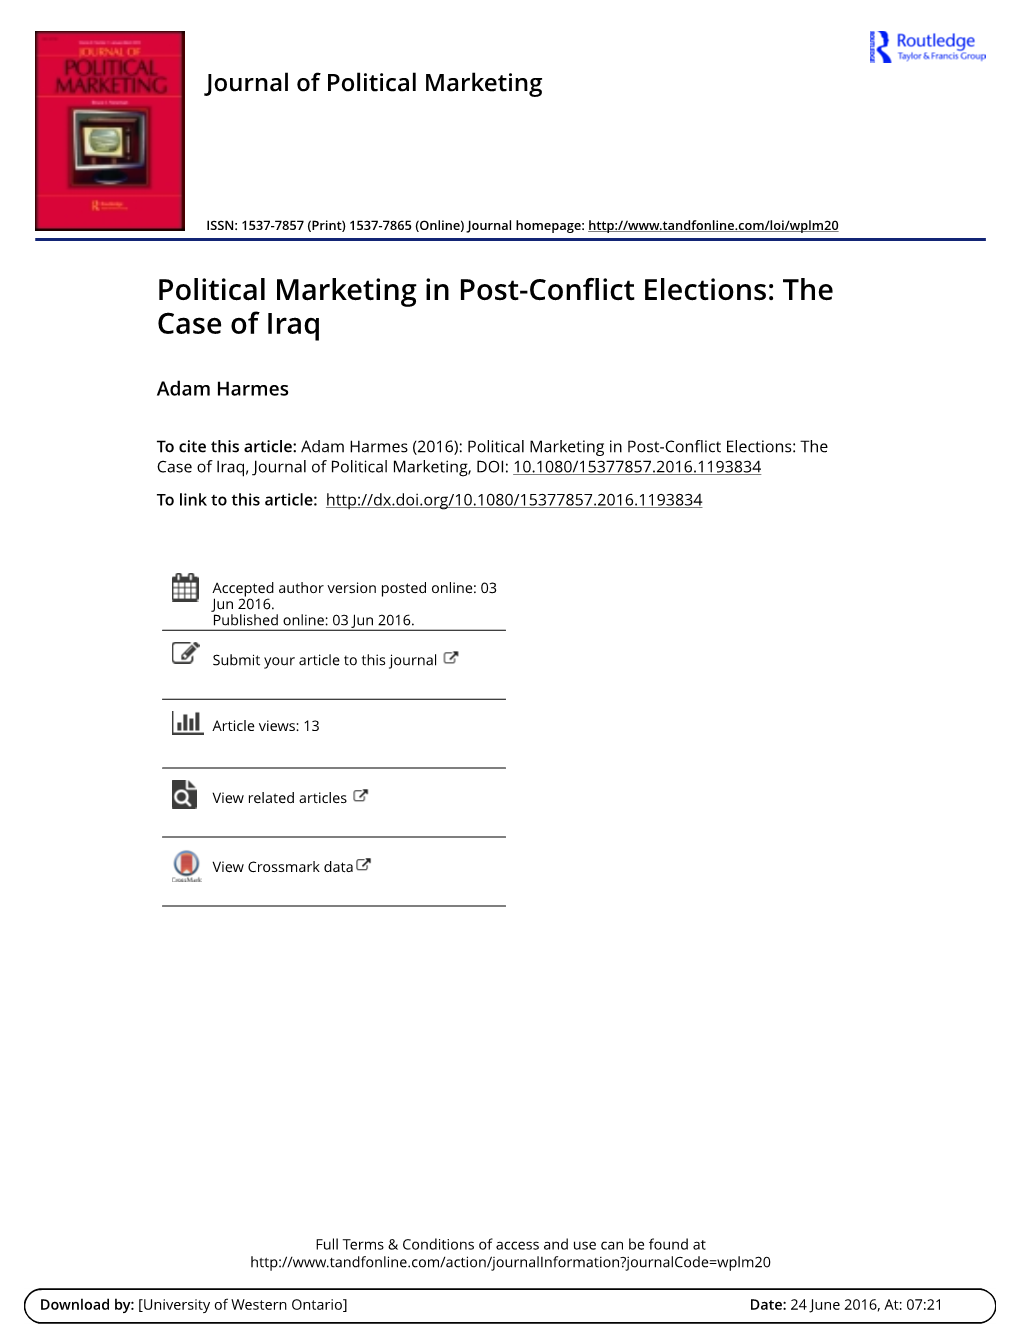 Political Marketing in Post-Conflict Elections: the Case of Iraq